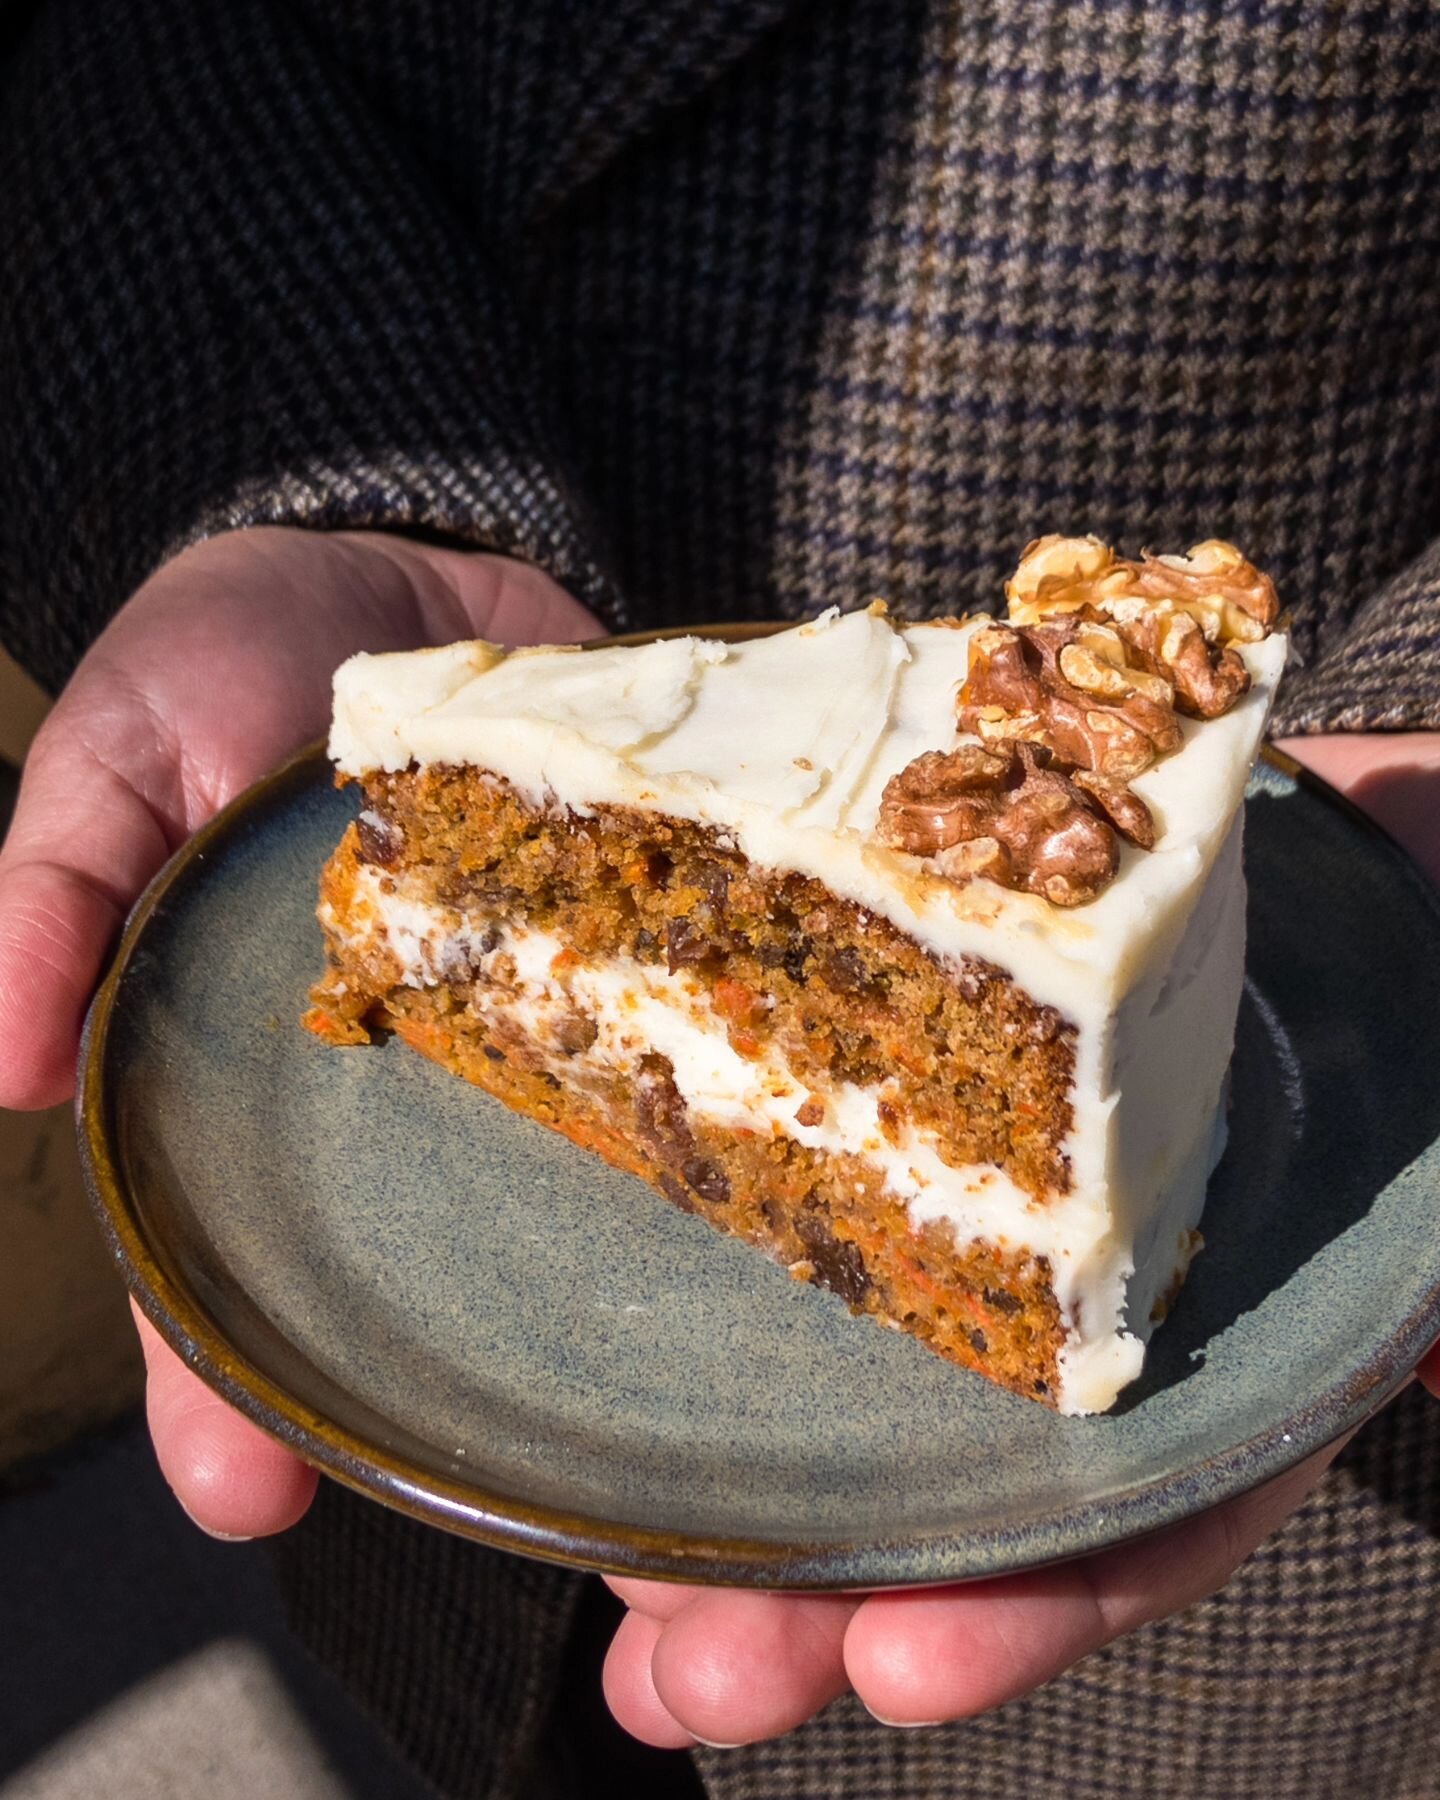 Coffee, breakfast, brown butter bourbon carrot cake with cream cheese icing. Weekend sorted. ✅️